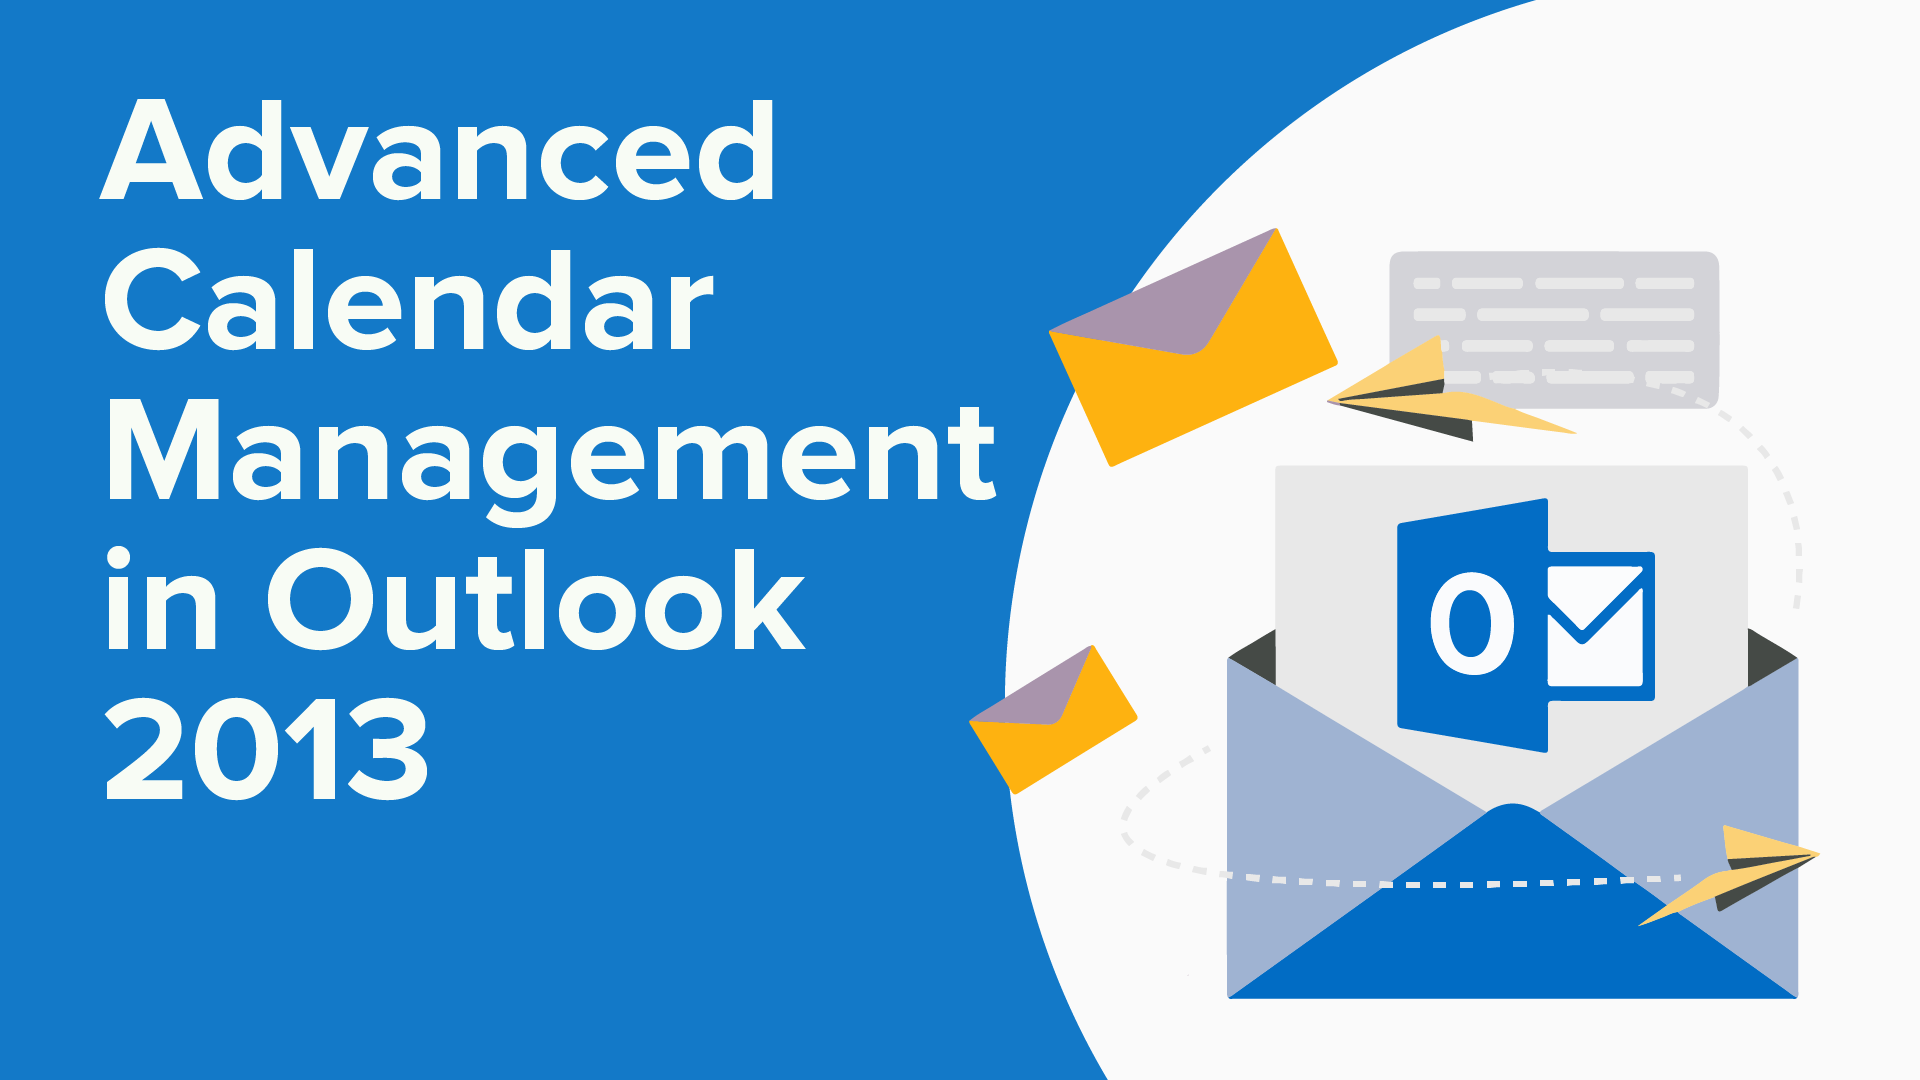 Introduction: Advanced Calendar Management in Outlook